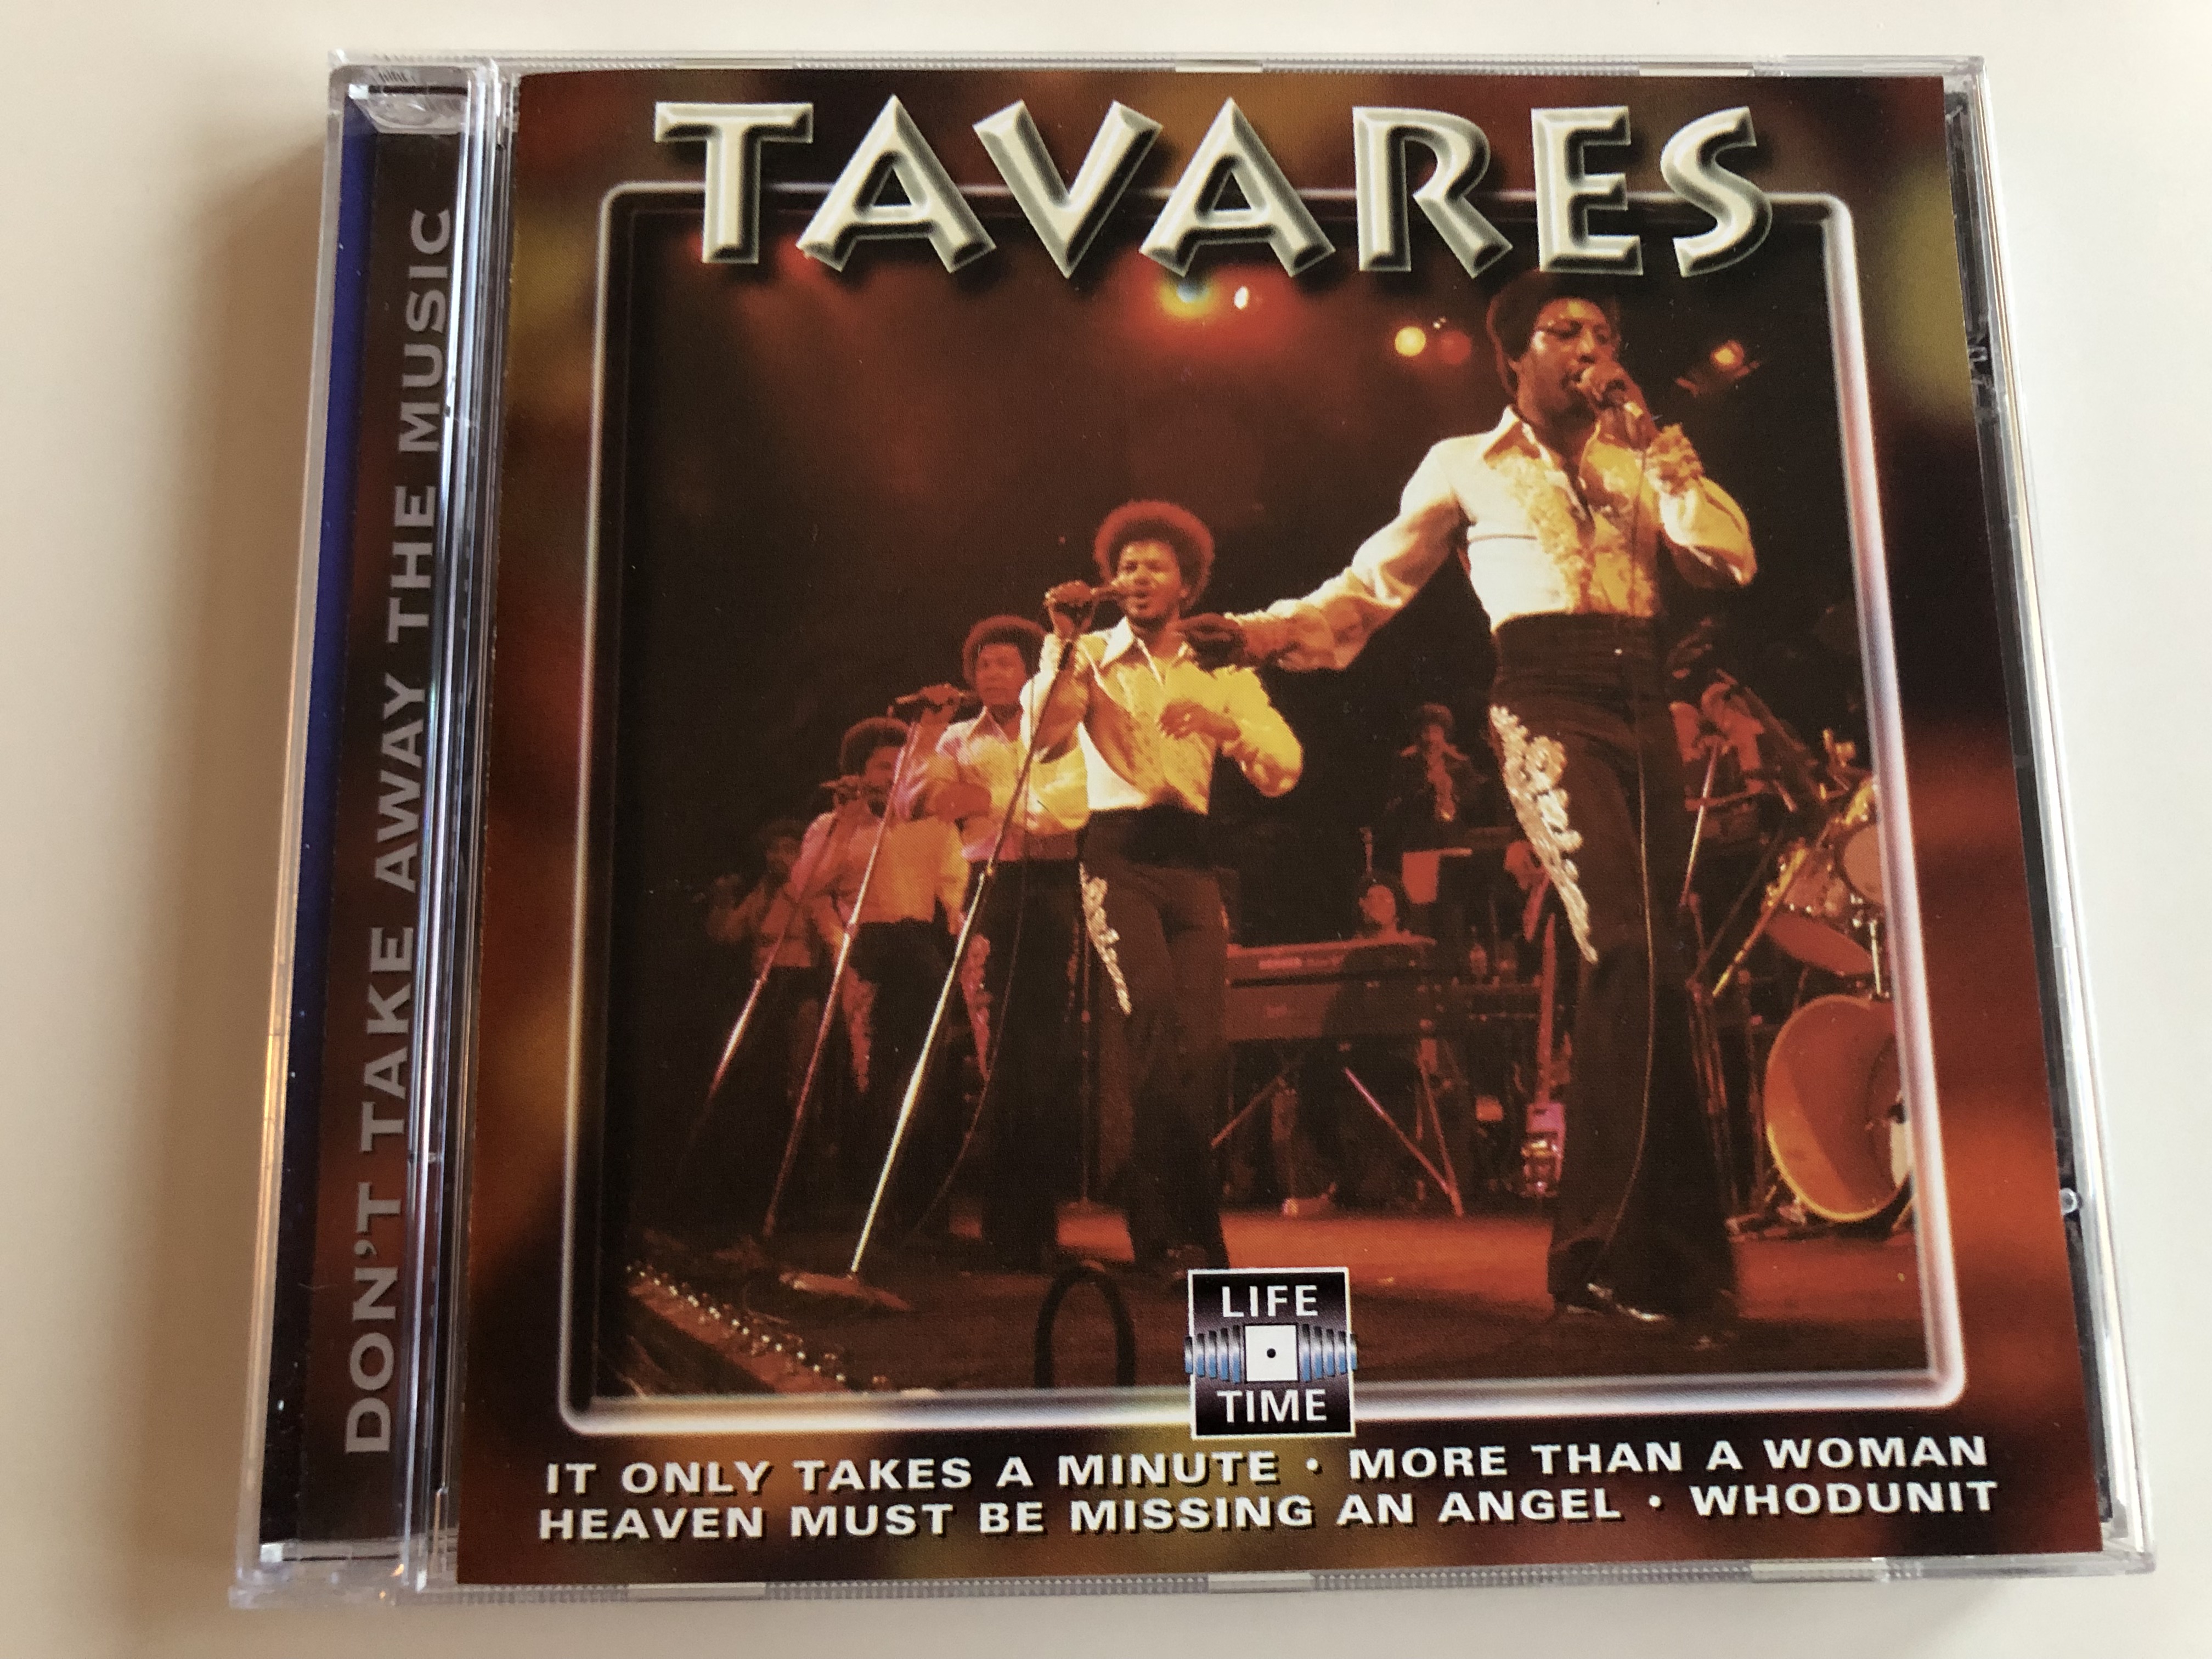 tavares-don-t-take-away-the-music-it-only-takes-a-minute-more-than-a-woman-heaven-must-be-missing-an-angel-whodunit-life-time-audio-cd-lt-5043-1-.jpg